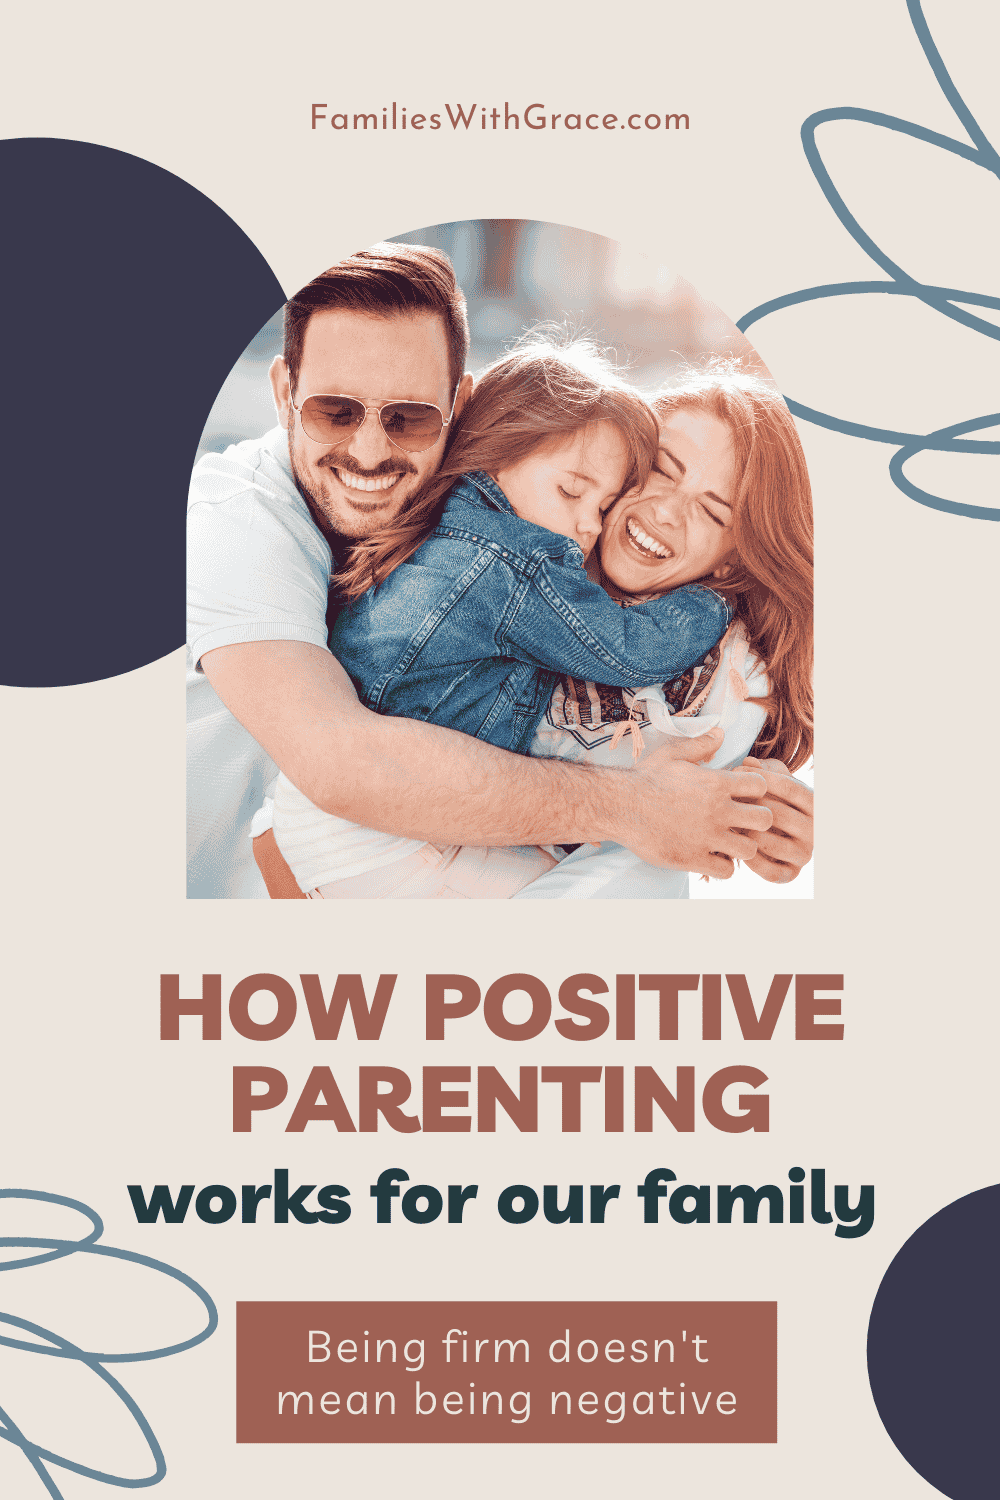 How positive parenting works for our family